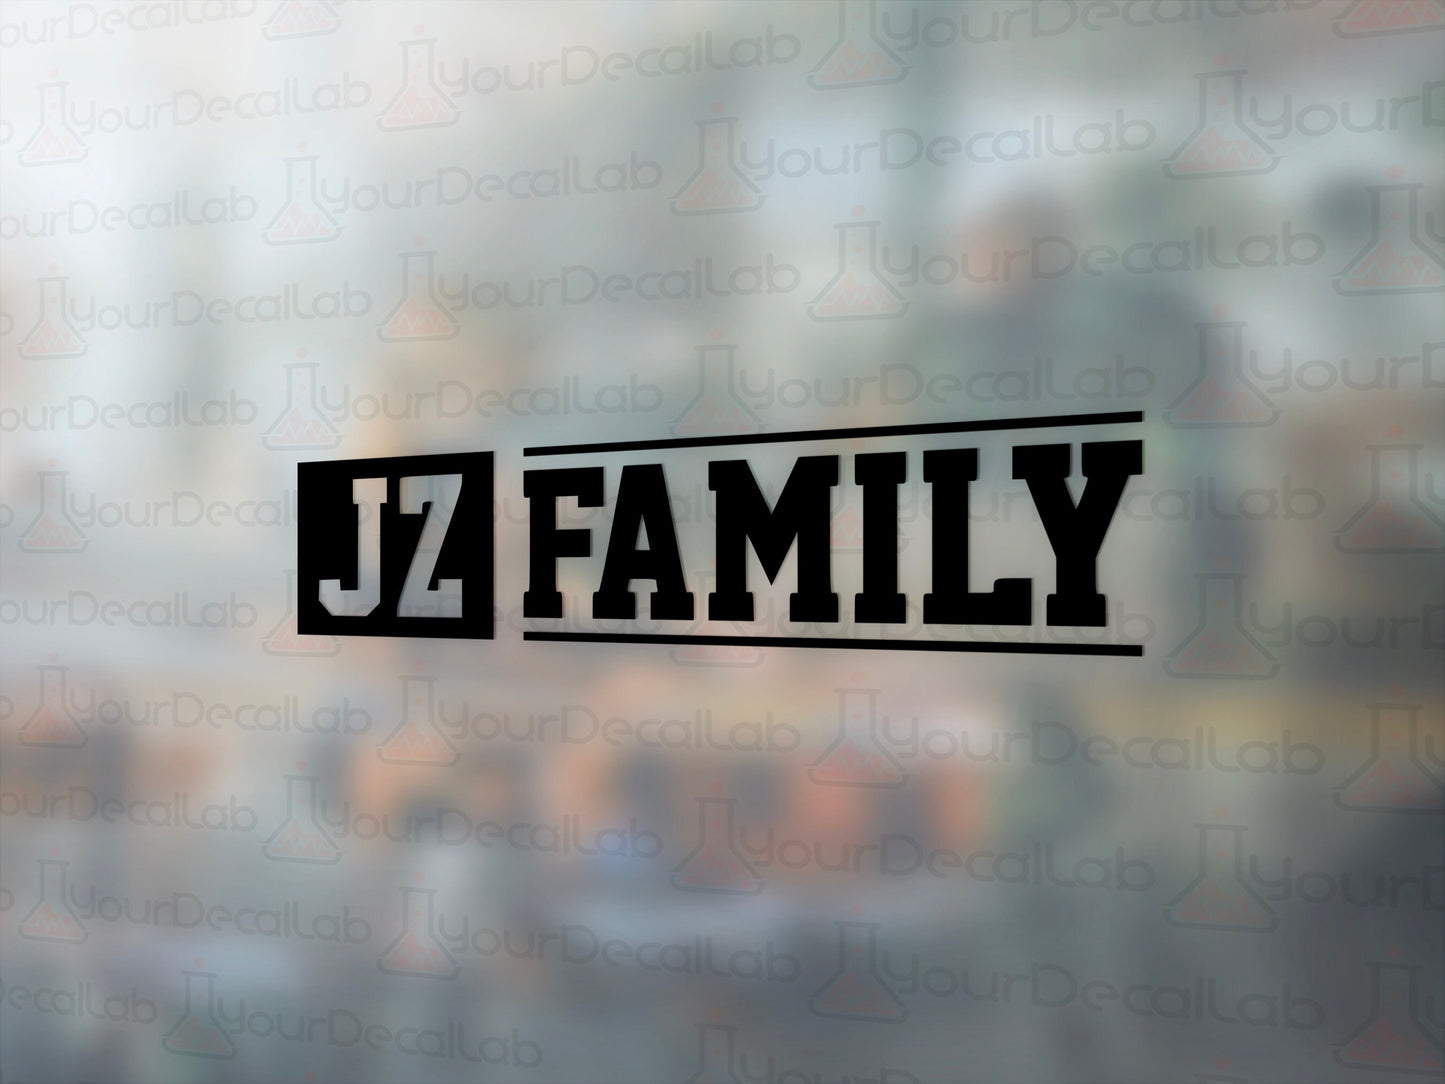 JZ Family Decal - Many Colors & Sizes